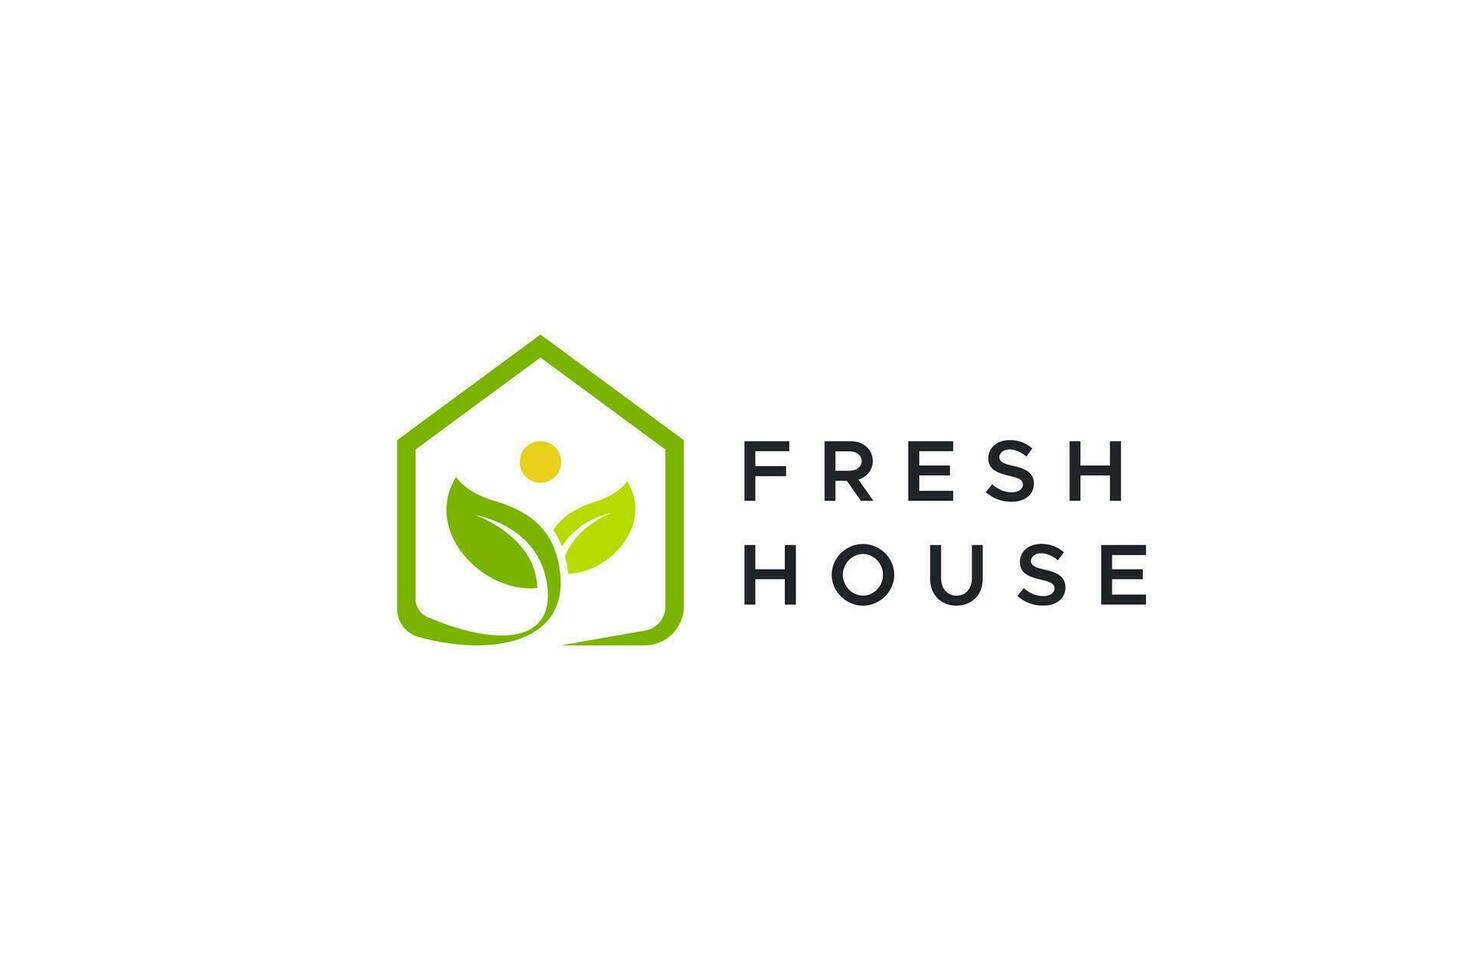 Fresh House Green Health Natural Environment Logo. Business Real Estate, Property and Residential Eco Healthy Life Style. vector